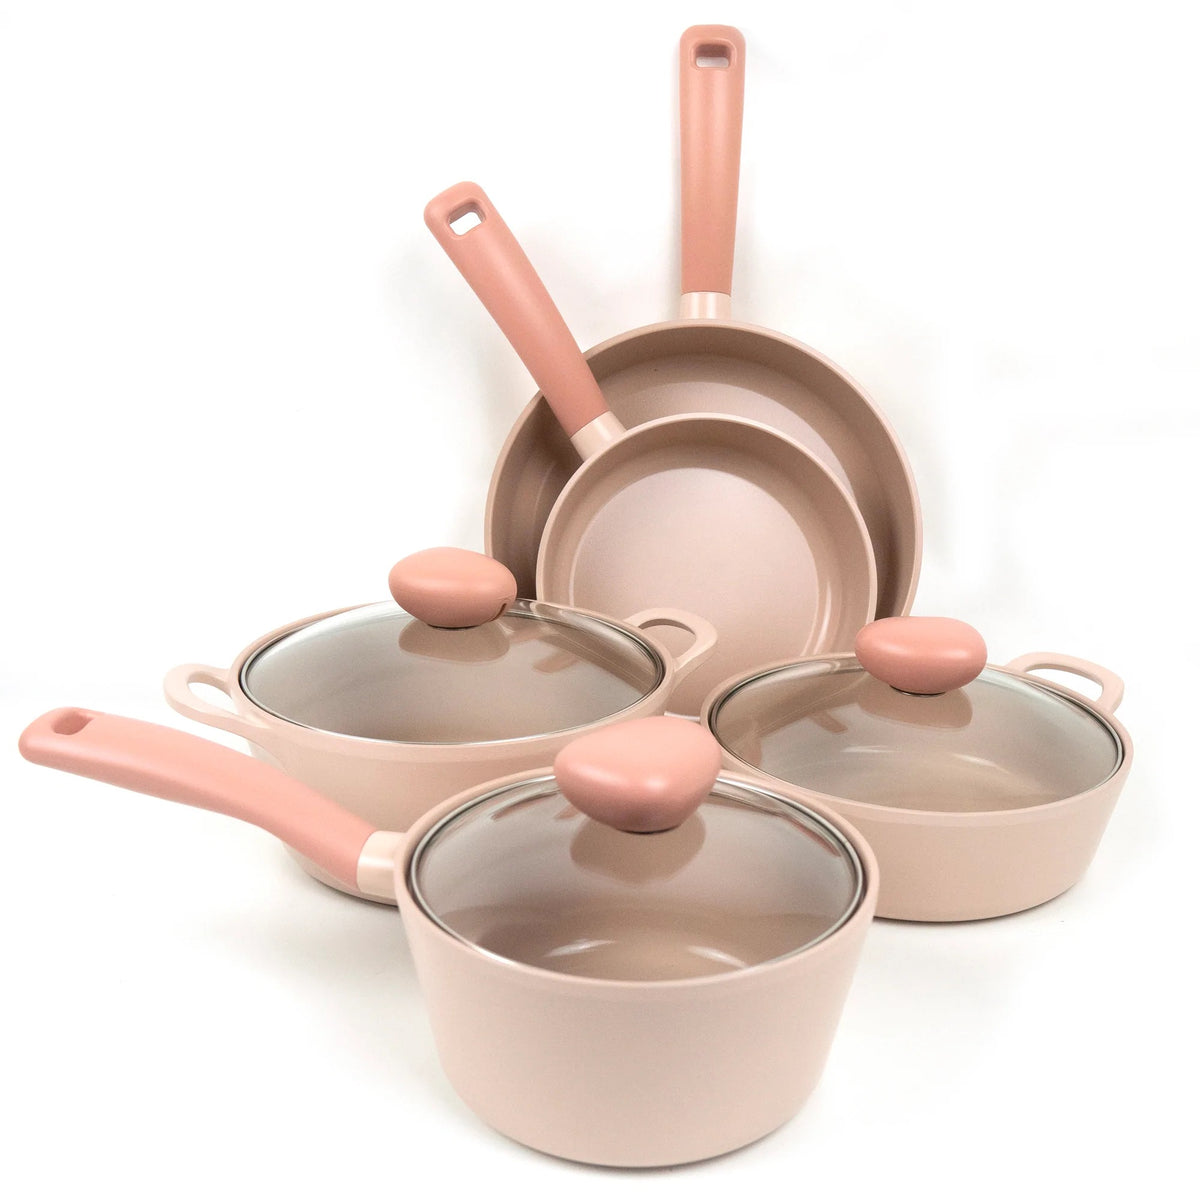 Neoflam Retro Sherbet Induction Set - 5pc Fry pan, Saucepan and Casserole